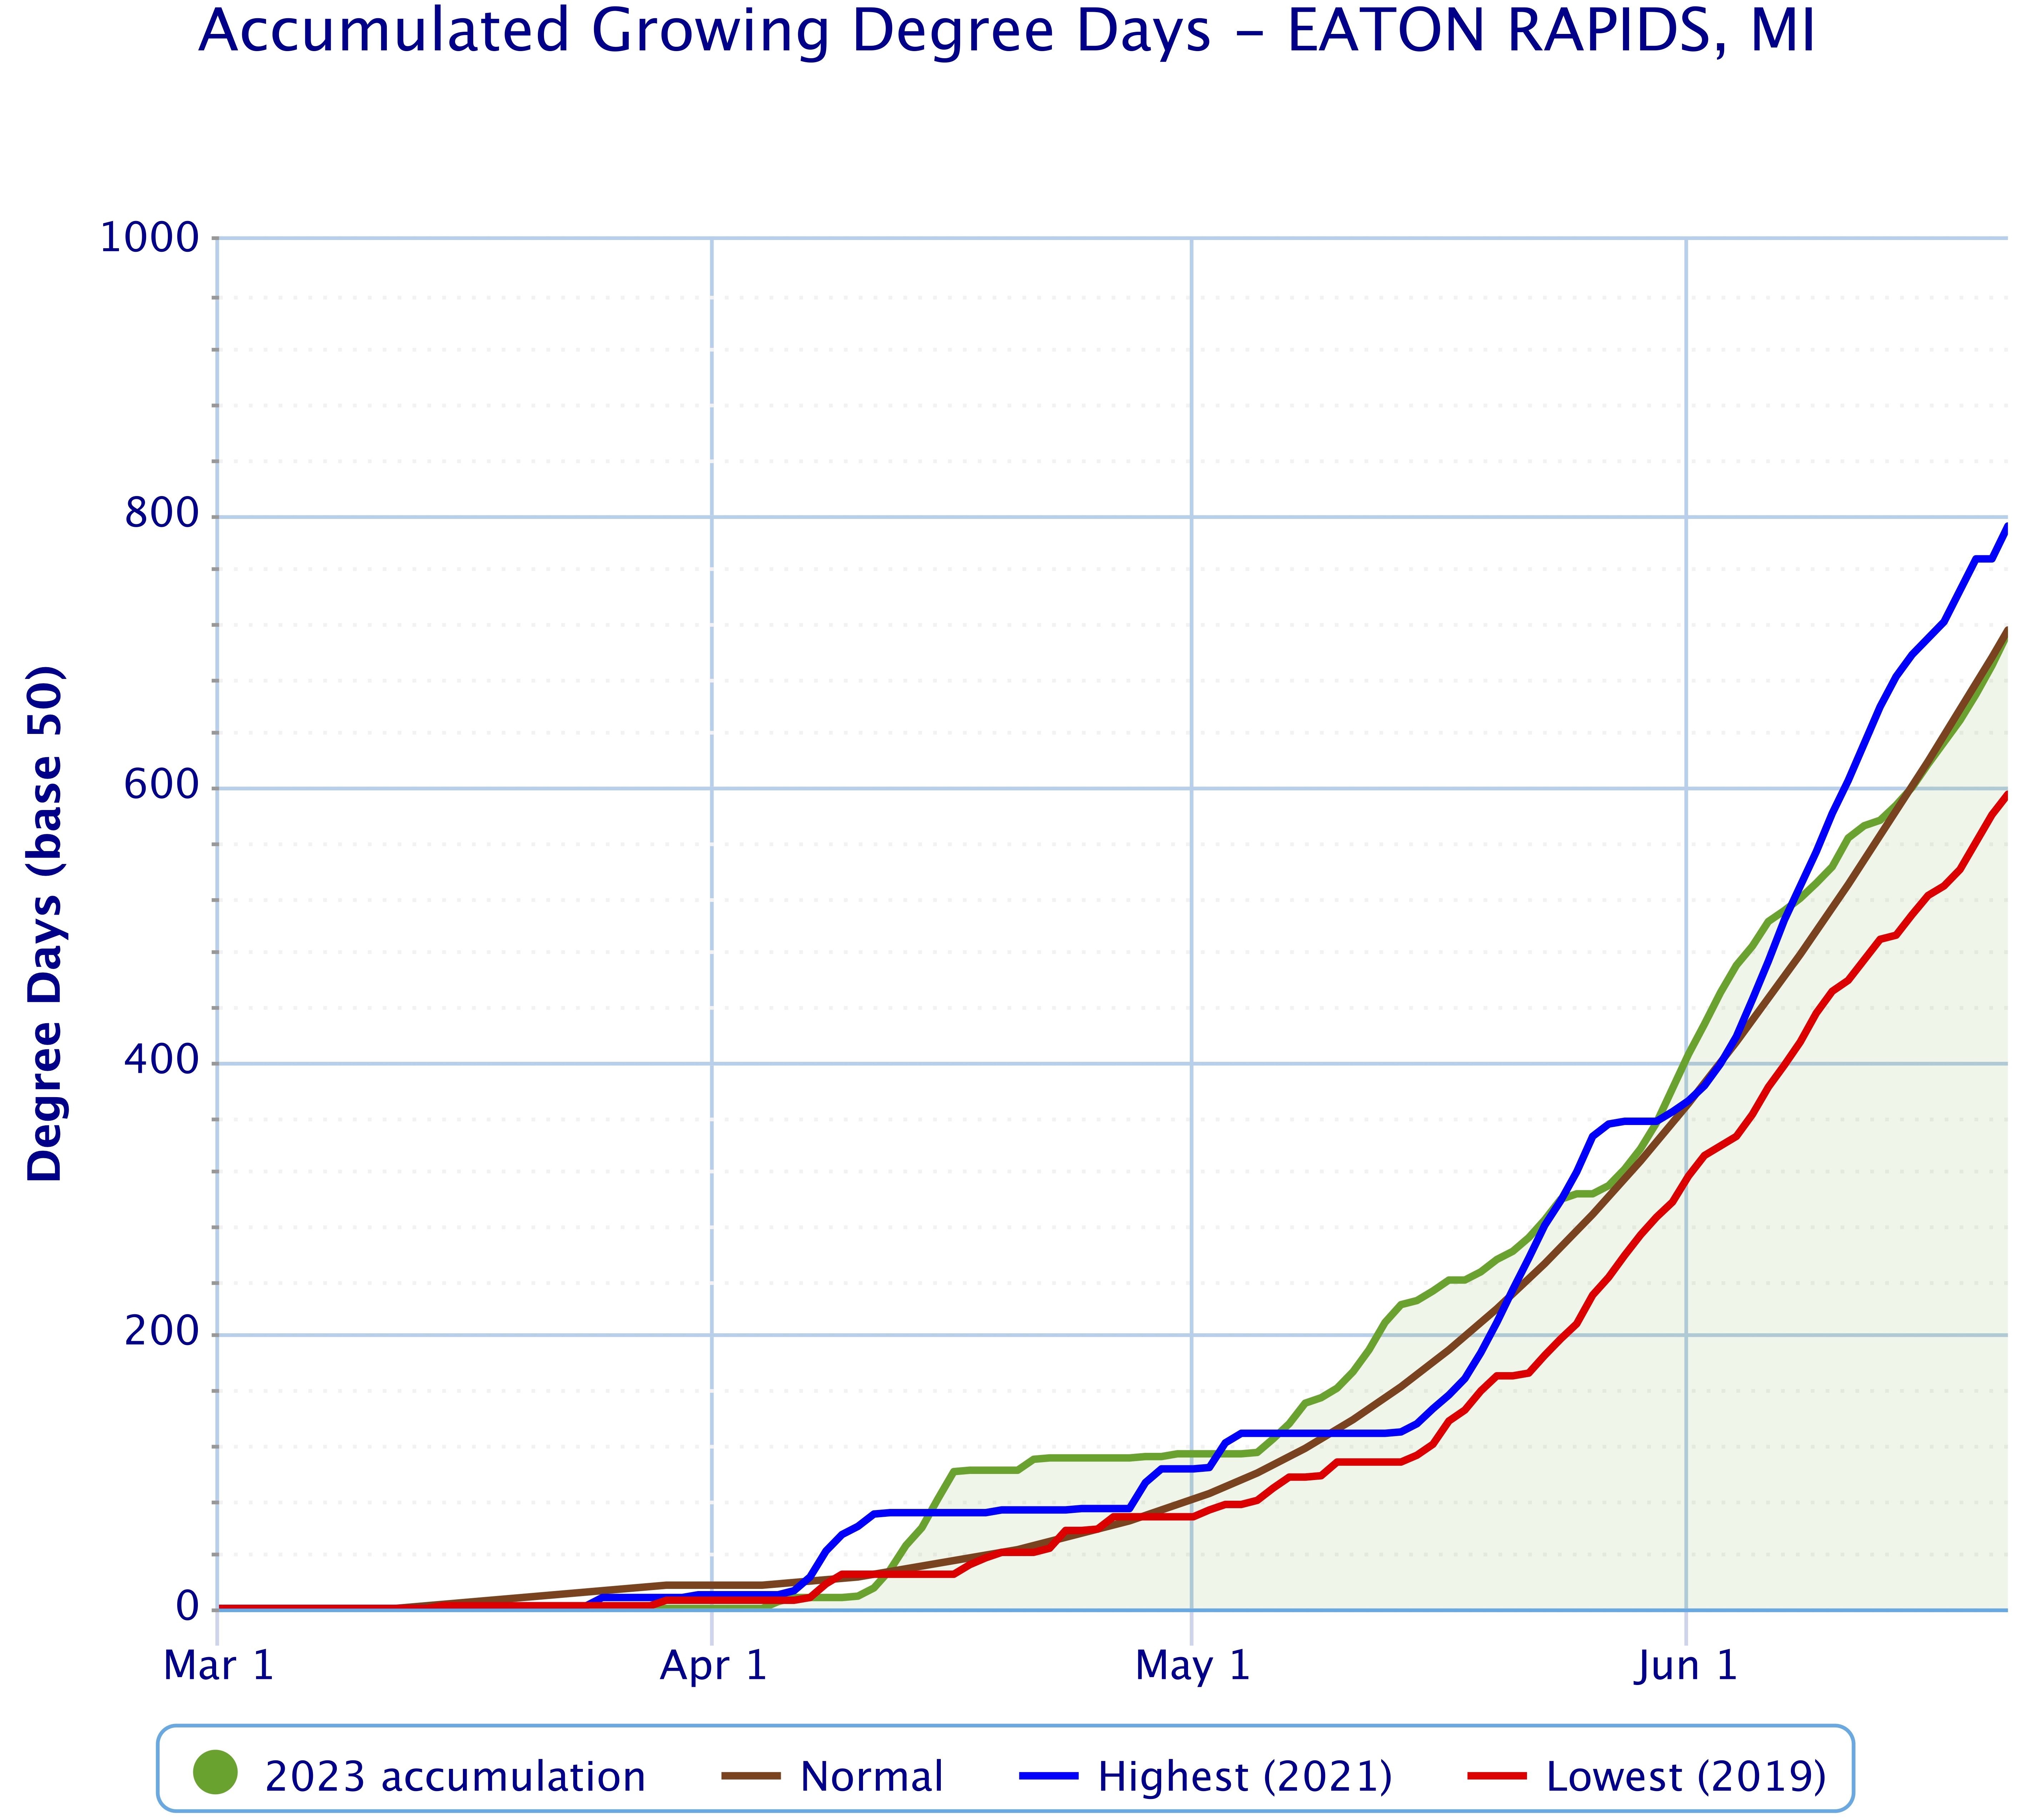 Accumulated Growing Degree Day Chart that shows accumulated growing degree days (Base 50) compared to highest, lowest, and normal